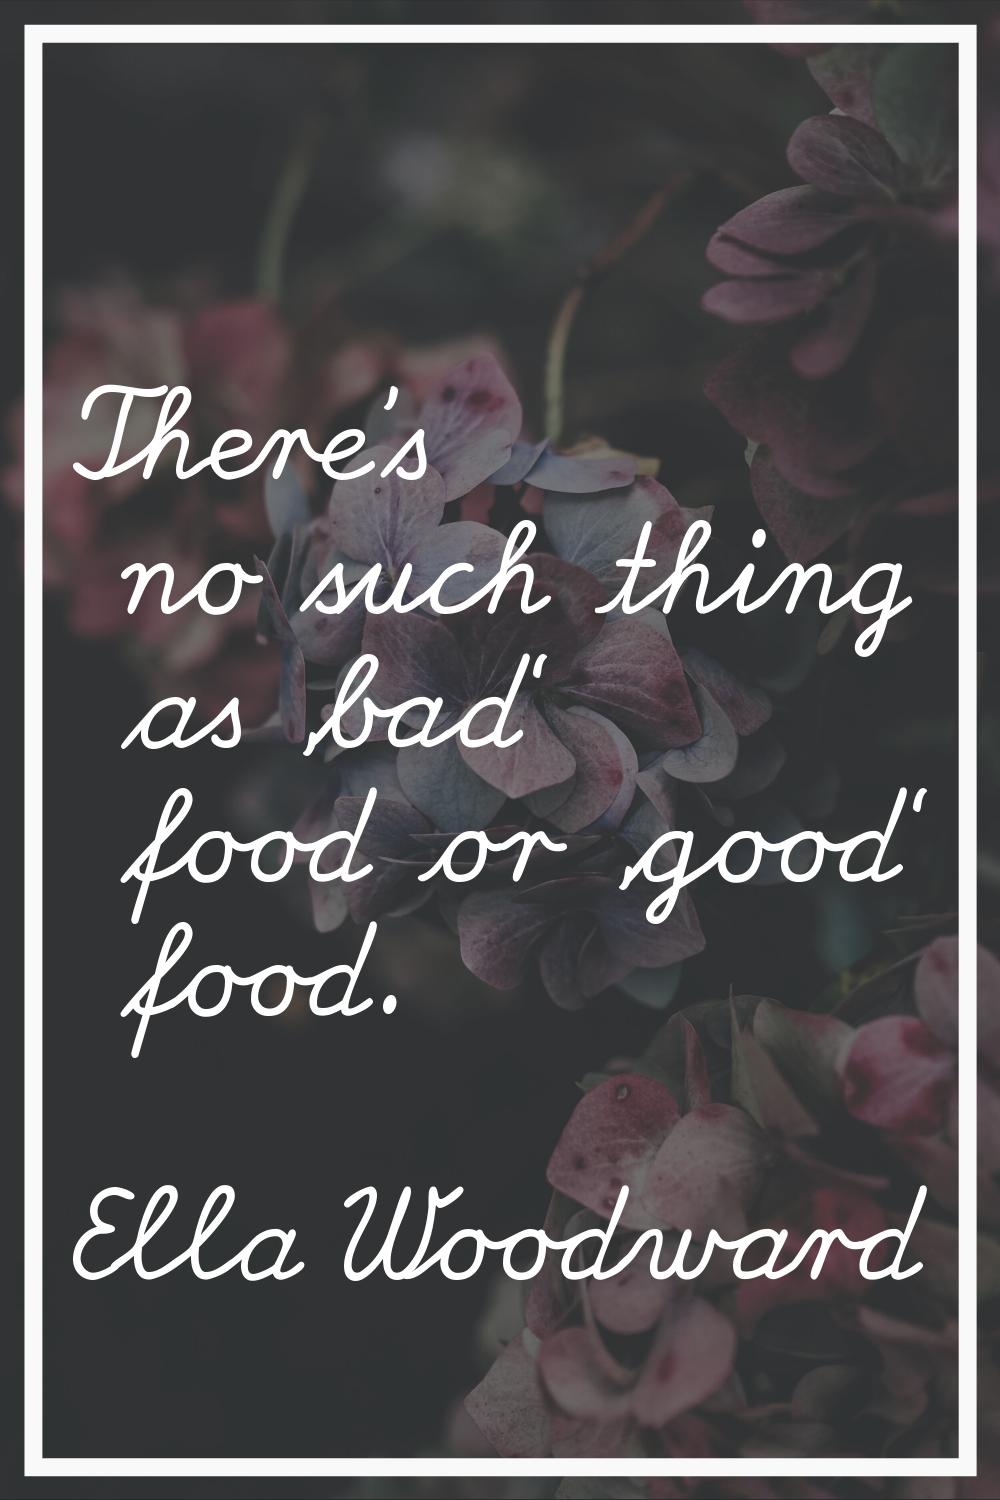 There's no such thing as 'bad' food or 'good' food.